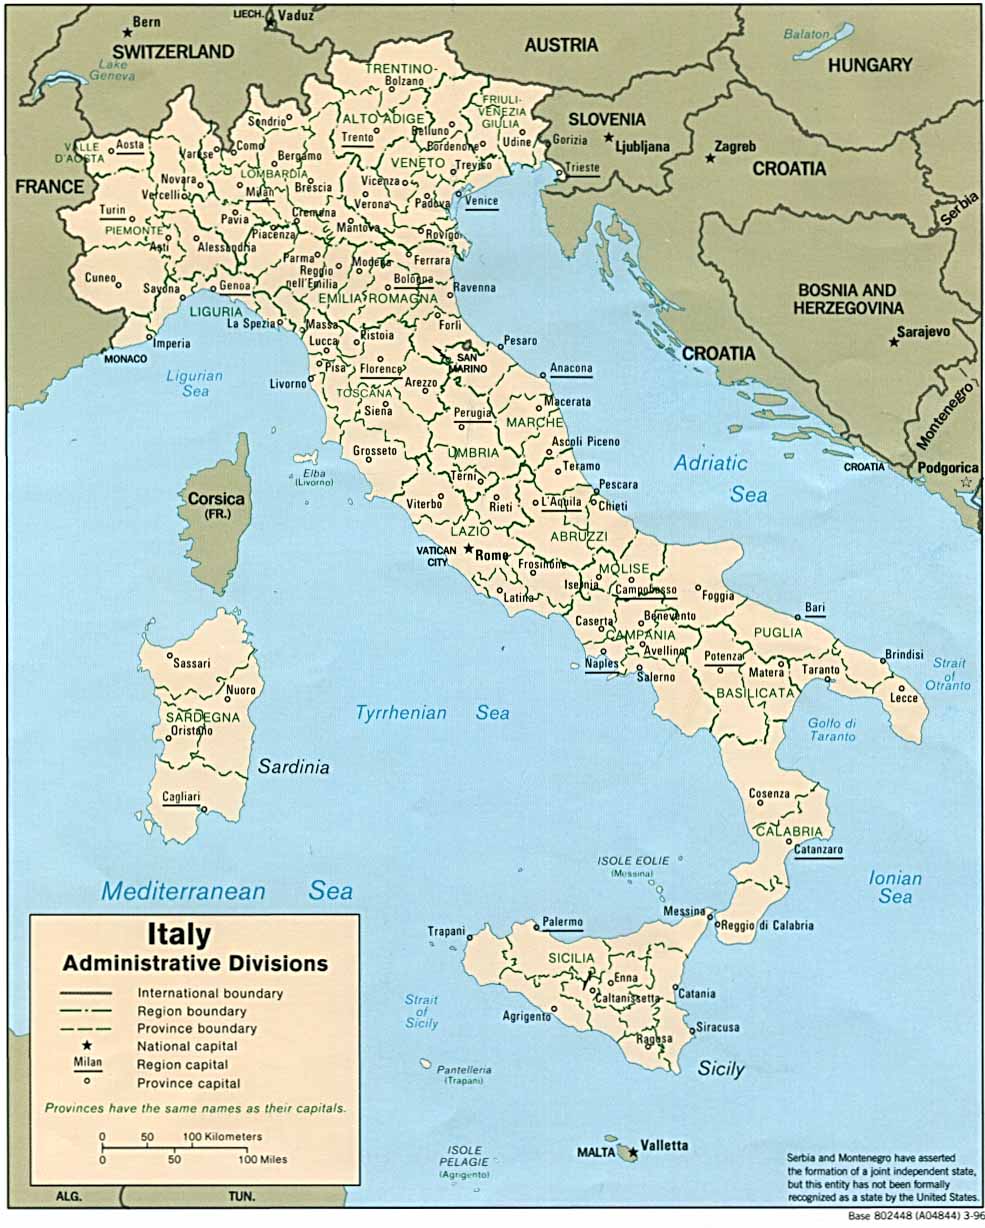 Italy: Administrative Divisions